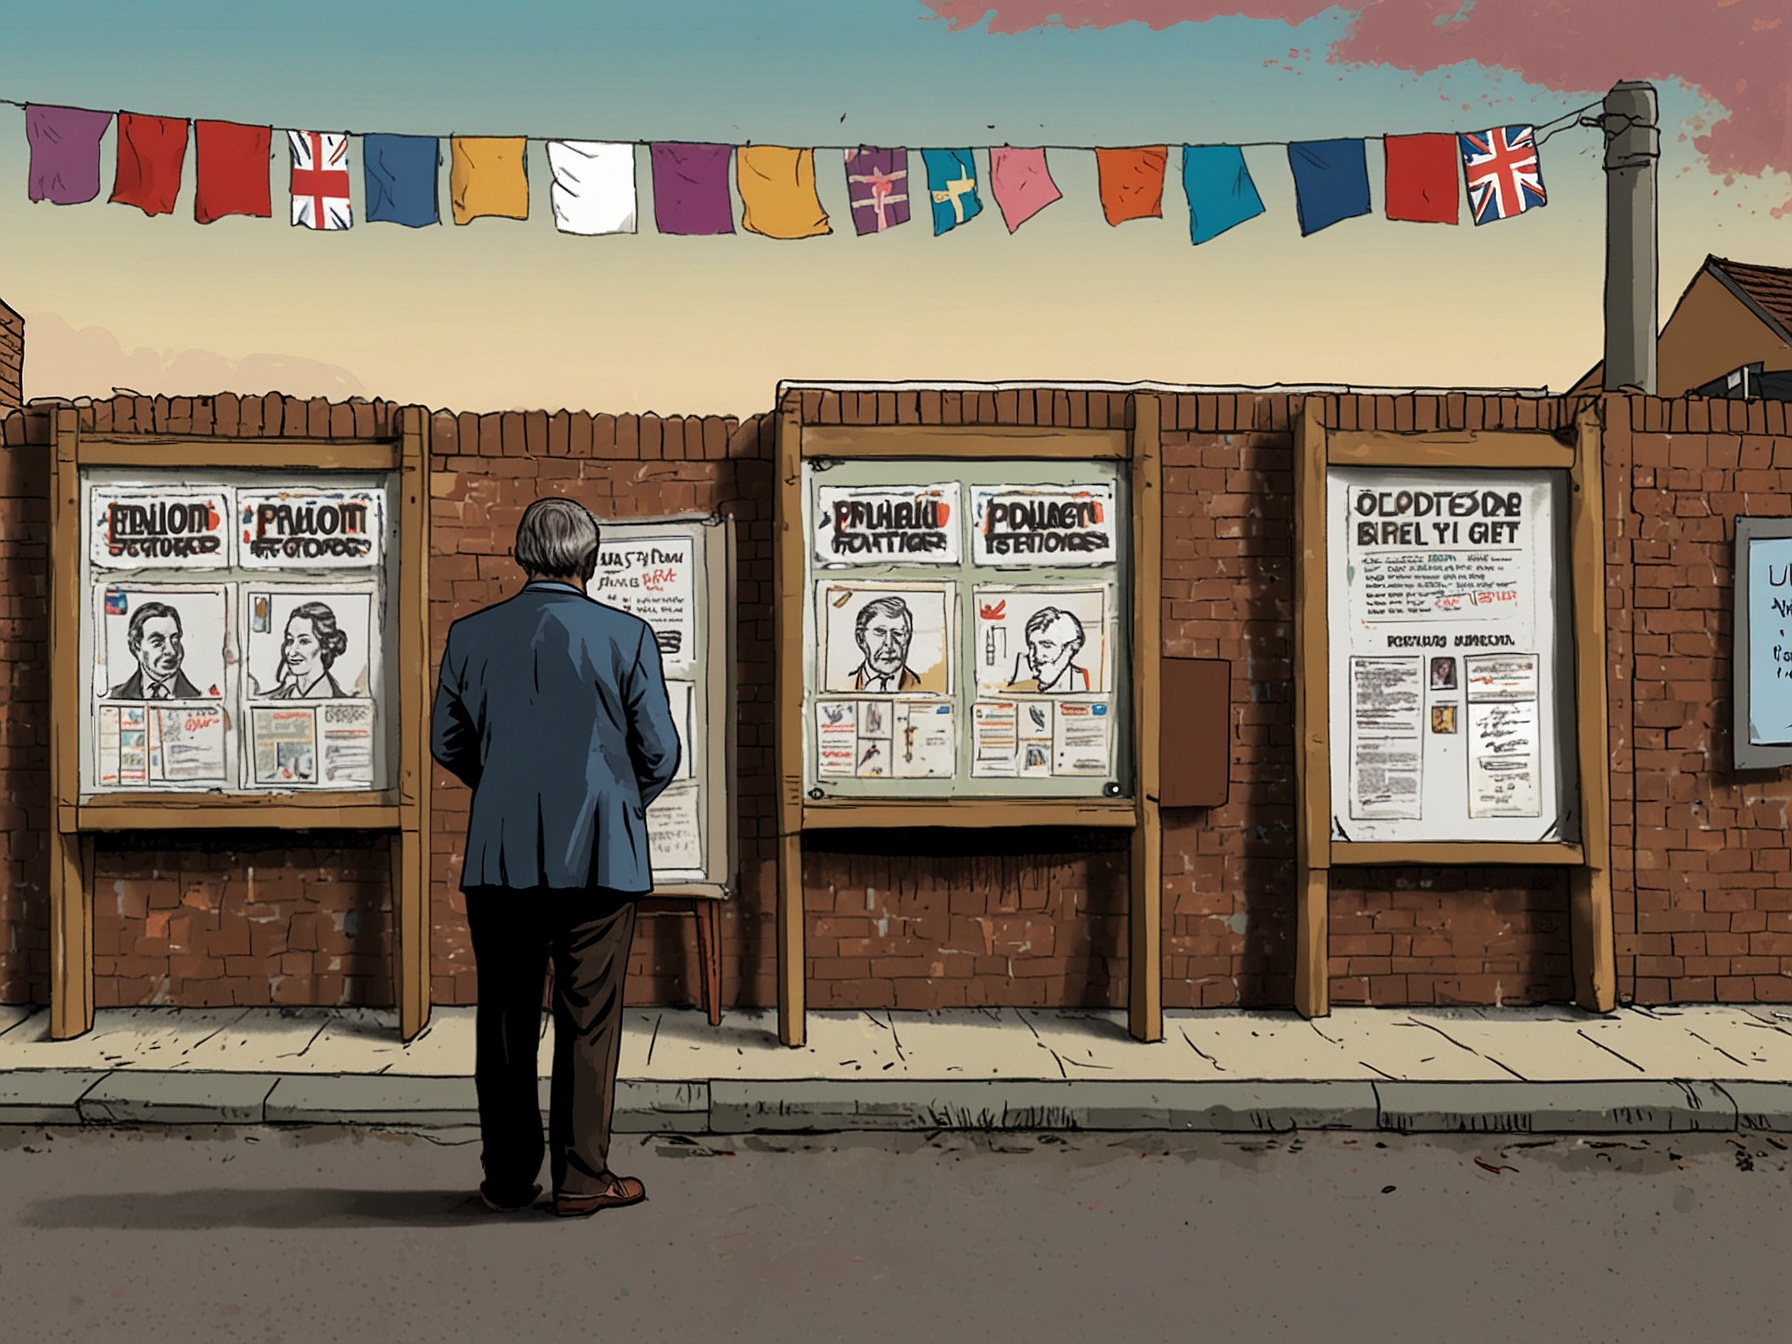 A polling station in Clacton with the backdrop of election posters, embodying the robust electoral process where Farage's policies on immigration and sovereignty resonate deeply with voters.